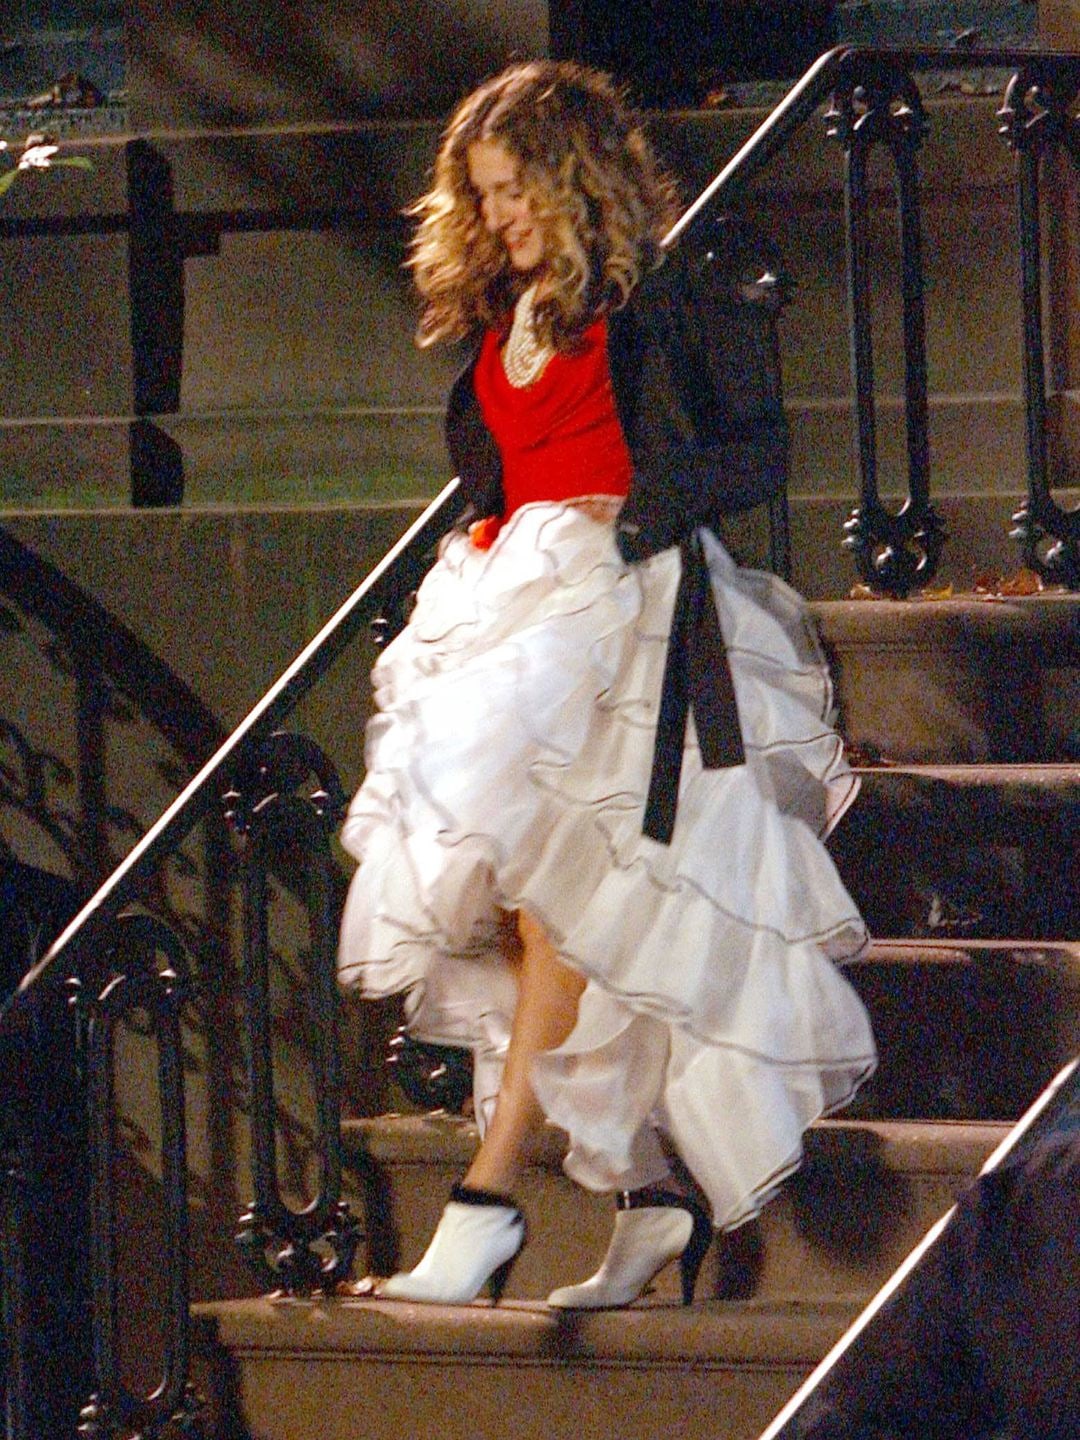 Carrie Bradshaw walking down steps wearing a white tiered skirt 